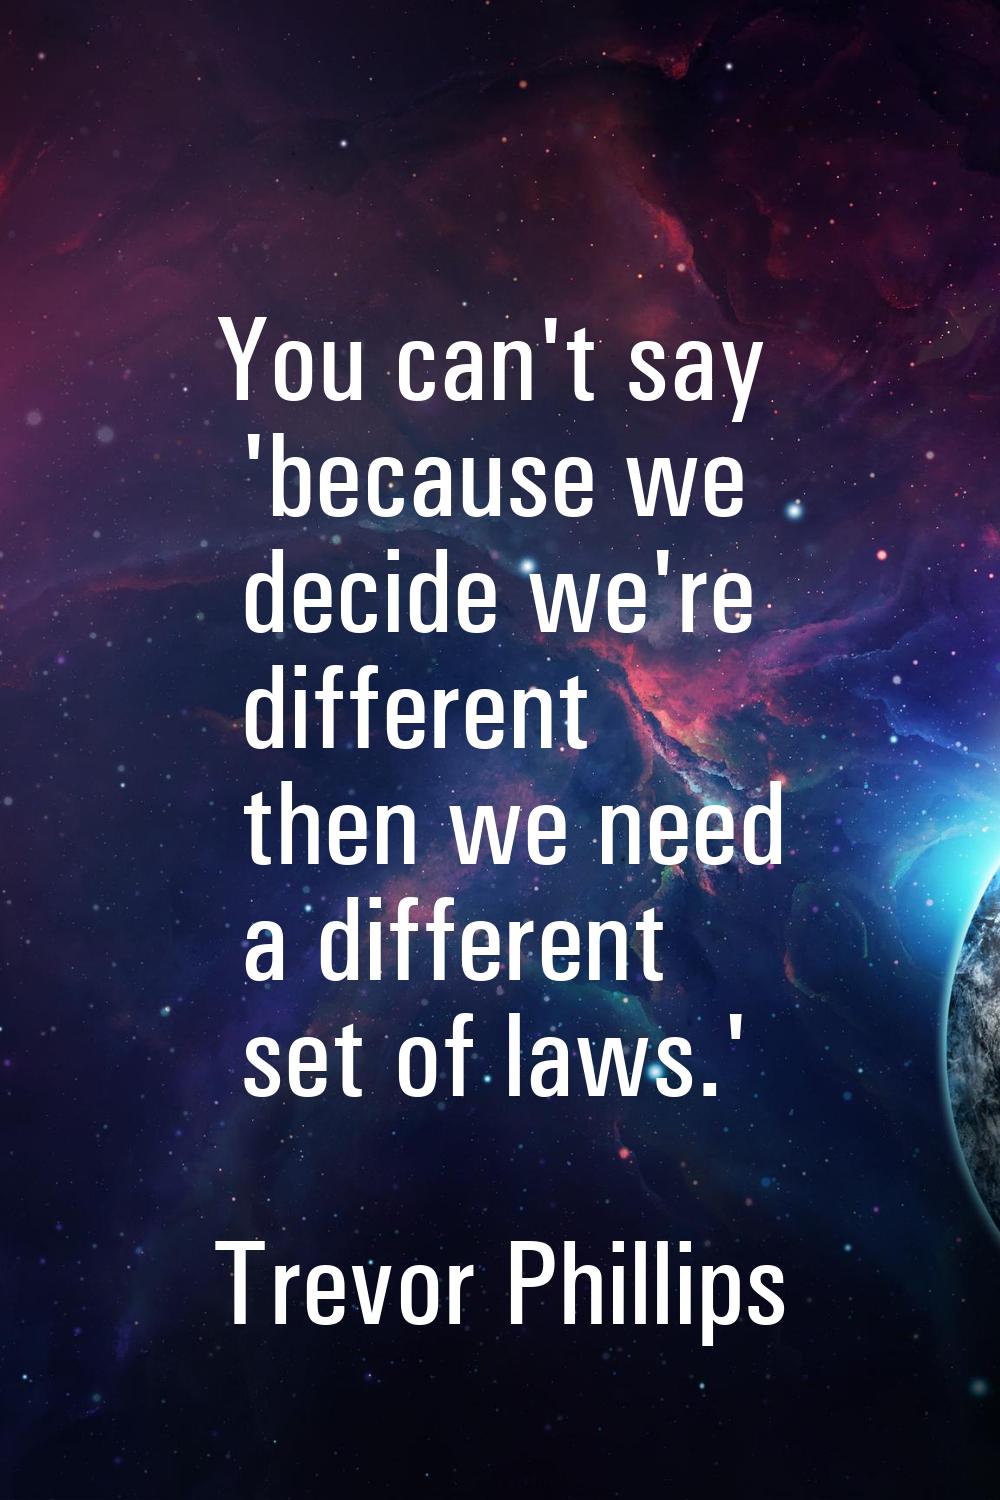 You can't say 'because we decide we're different then we need a different set of laws.'